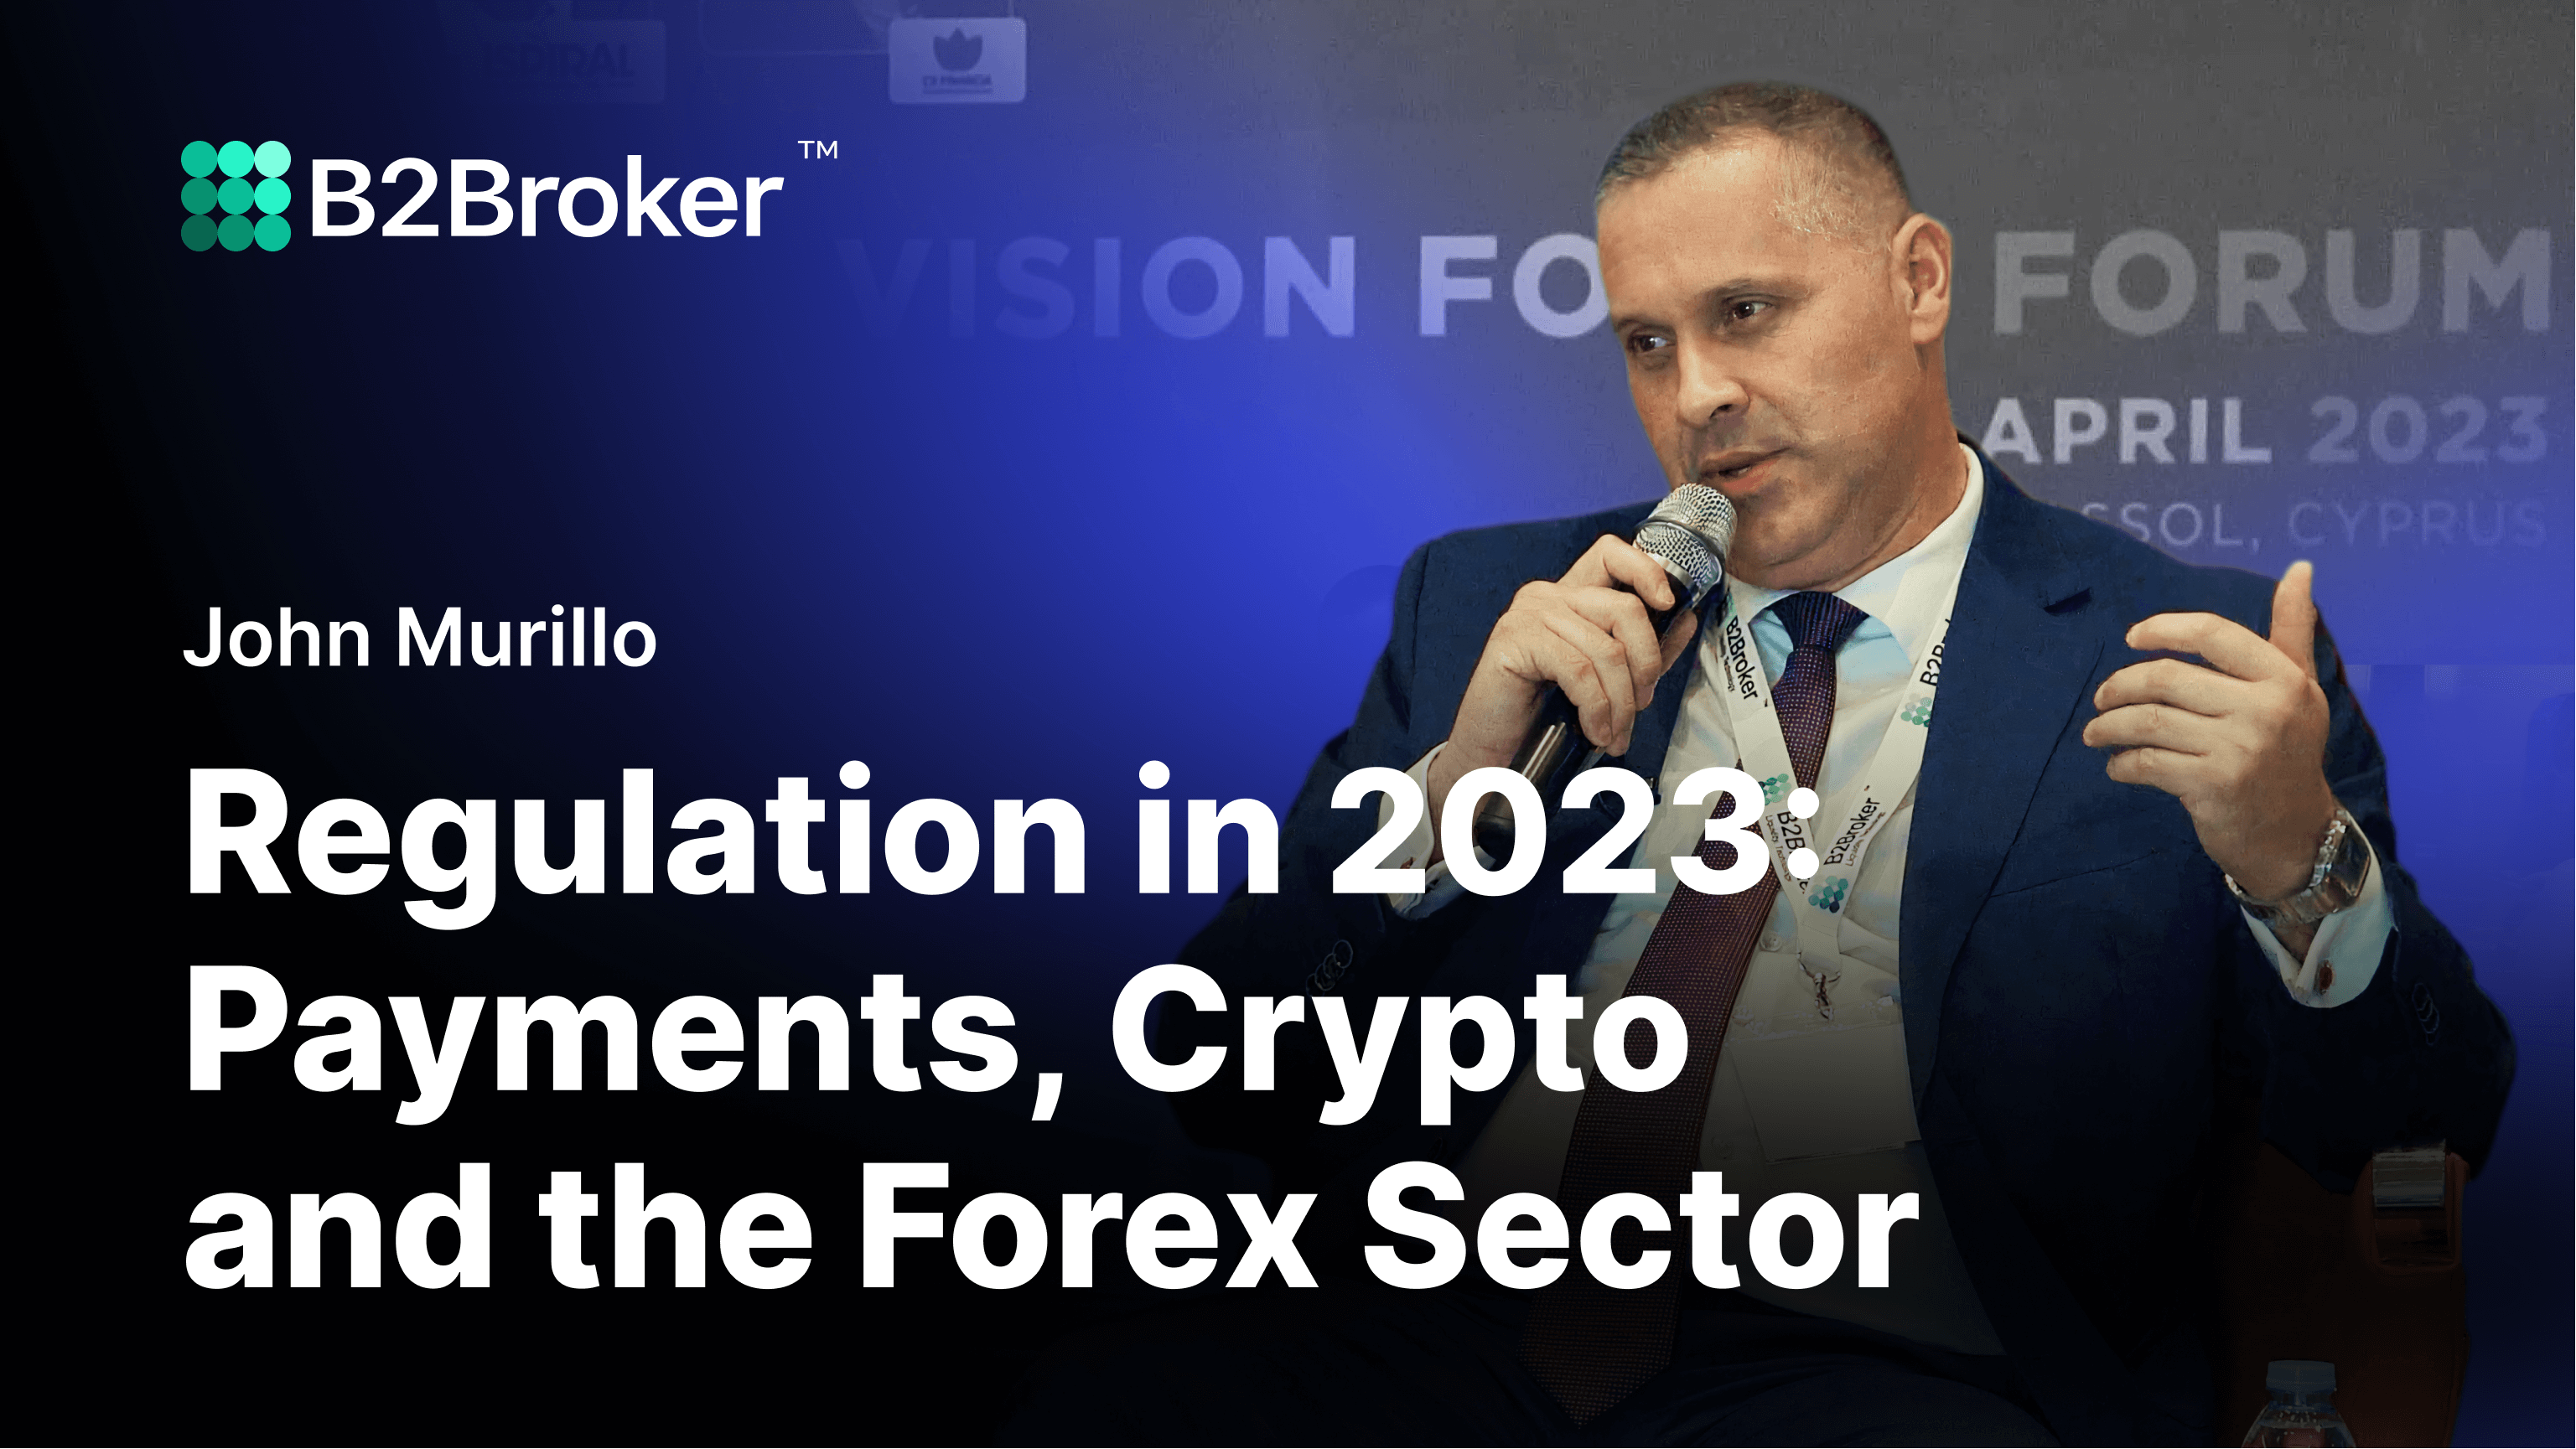 Vision Forex Forum | Regulation in 2023: Payments, Crypto and the Forex Sector